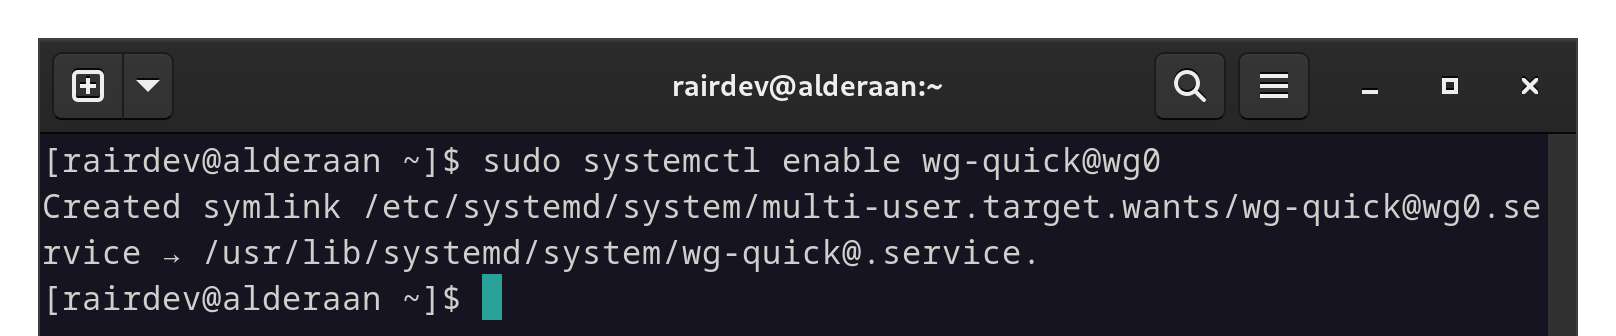 enable wireguard systemd